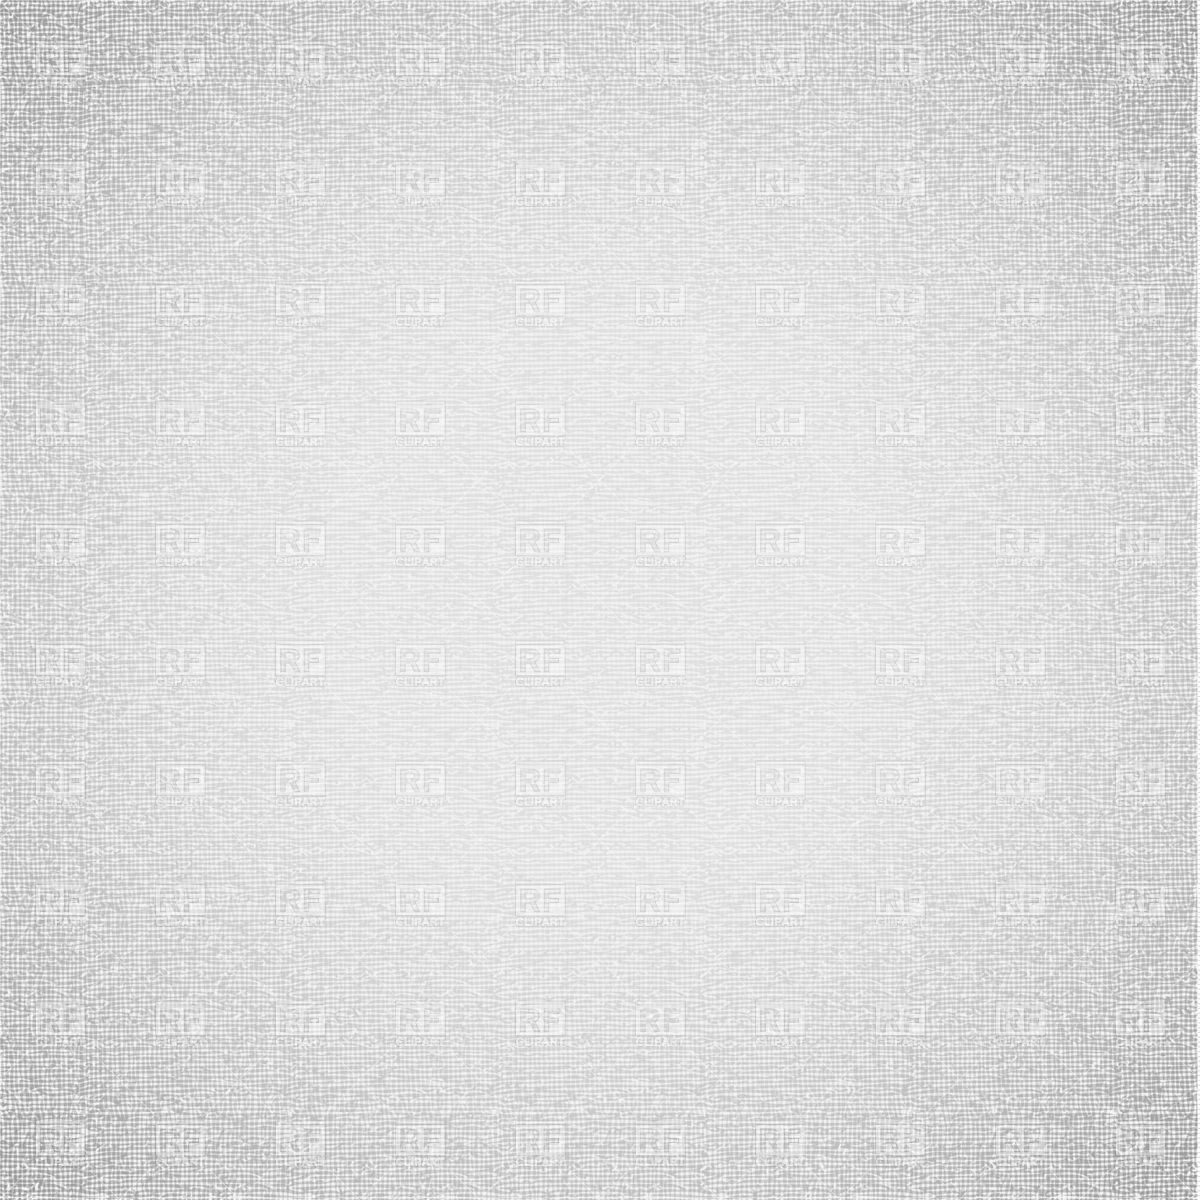 White Canvas   Fabric Texture 18541 Backgrounds Textures Abstract    